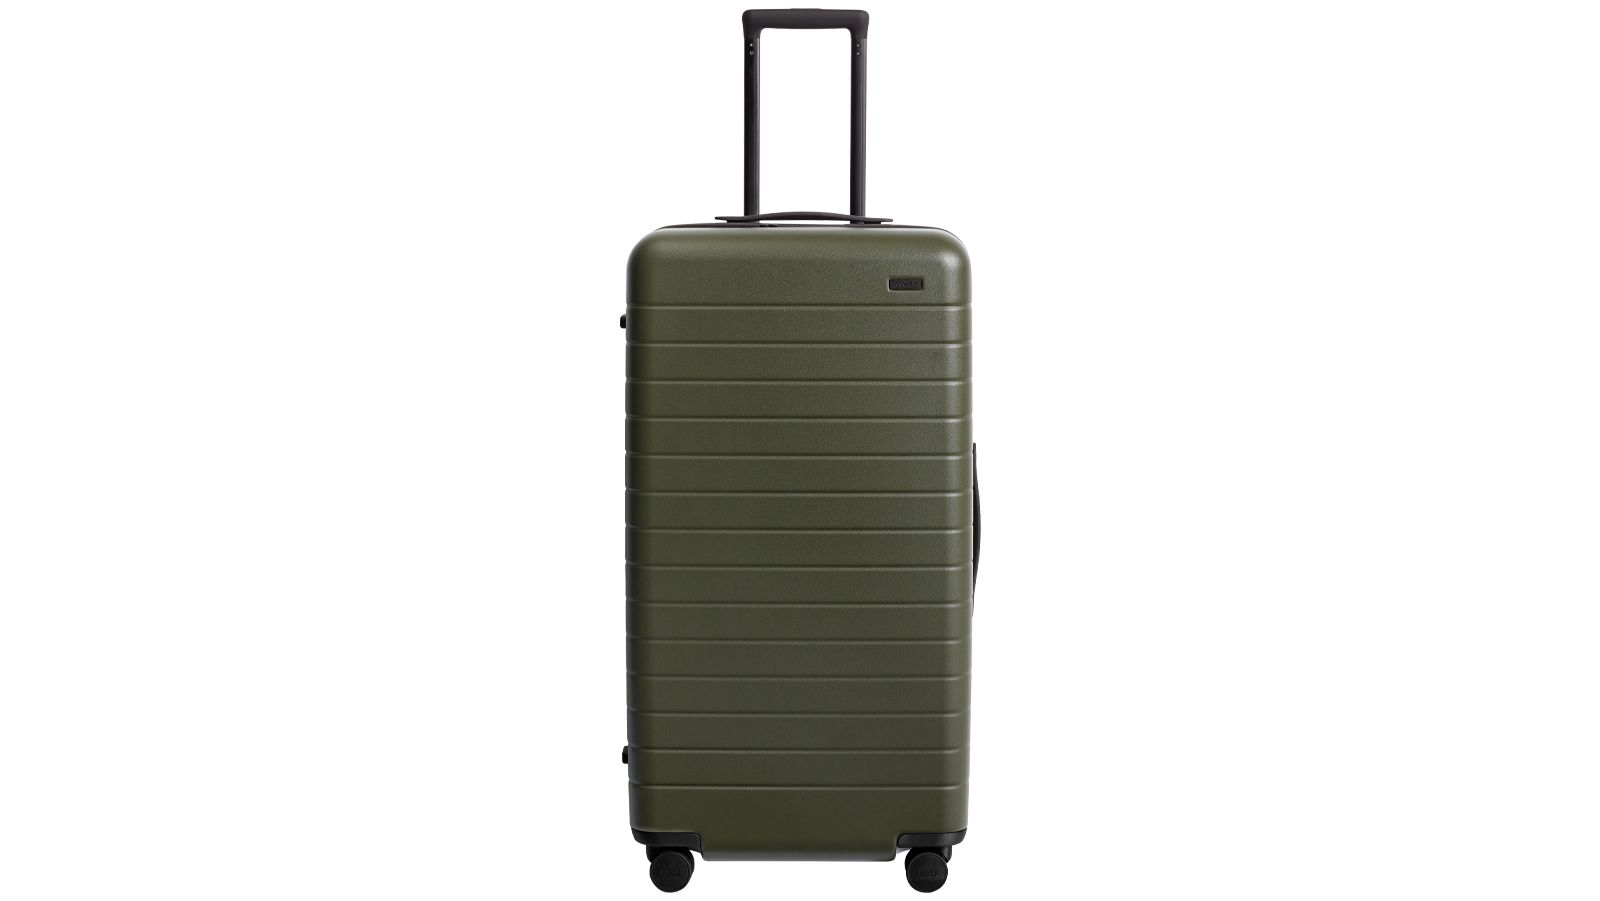 Away rereleased its classic suitcases